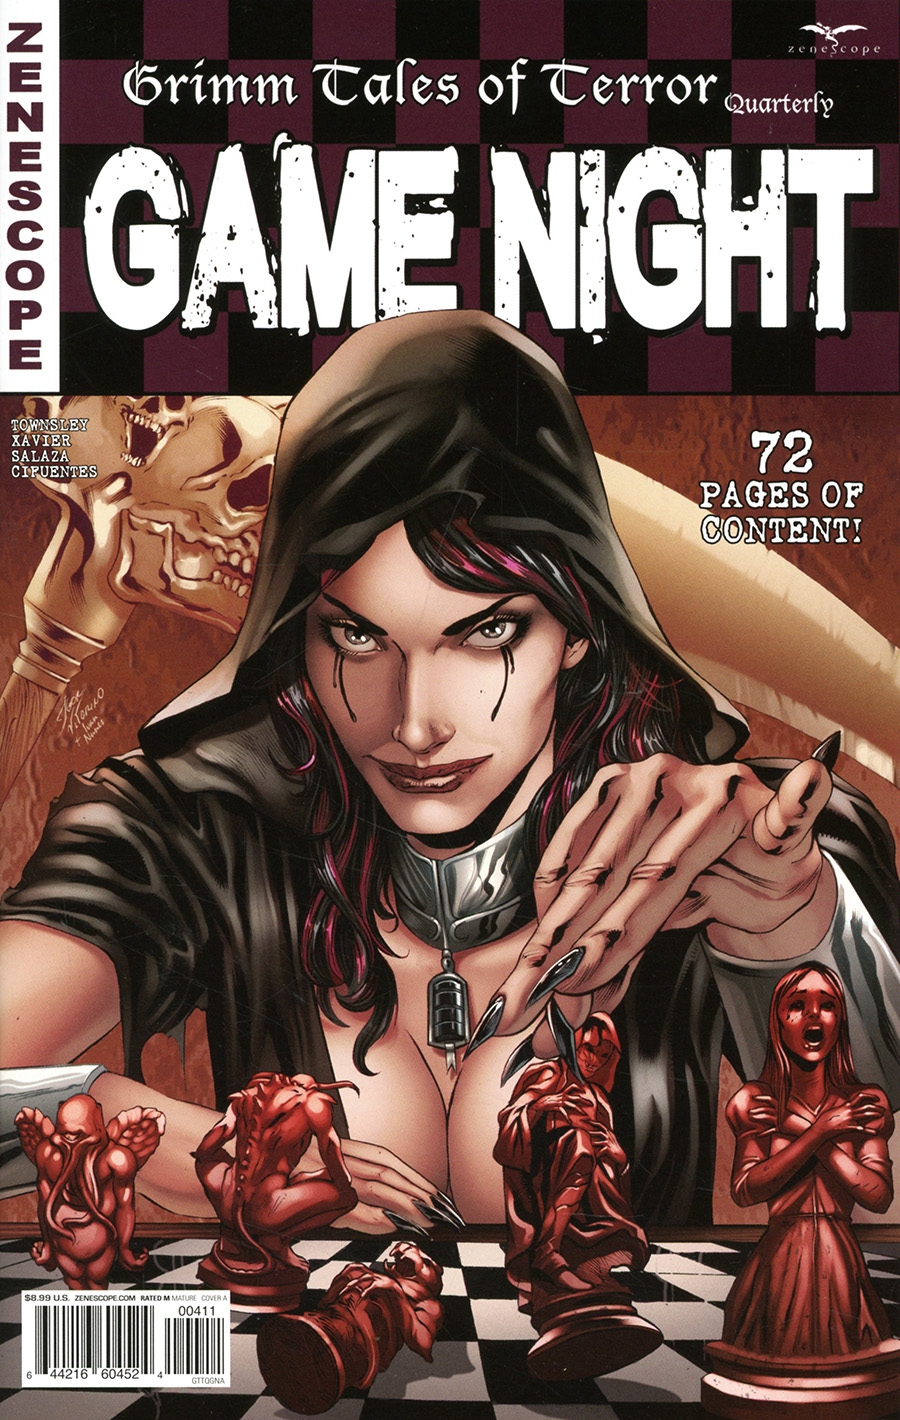 Grimm Fairy Tales Presents Myths & Legends Quarterly #5 Game Night Cover A Igor Vitorino